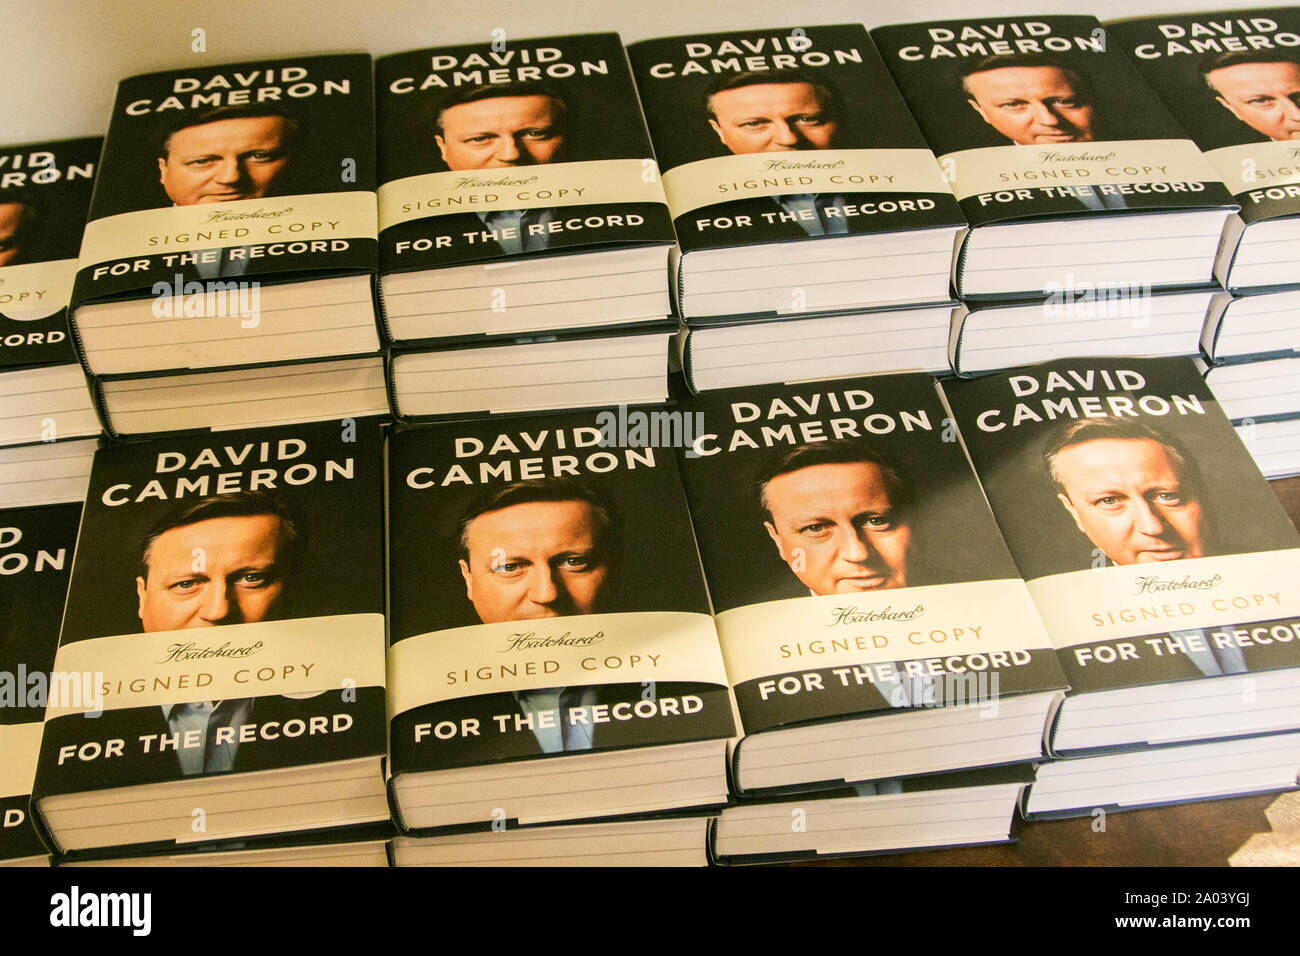 Signed copies of the autobiography book ' For the Record' by the former British Prime Minister David Cameron at Hatchards bookstore in Piccadilly, London. Stock Photo